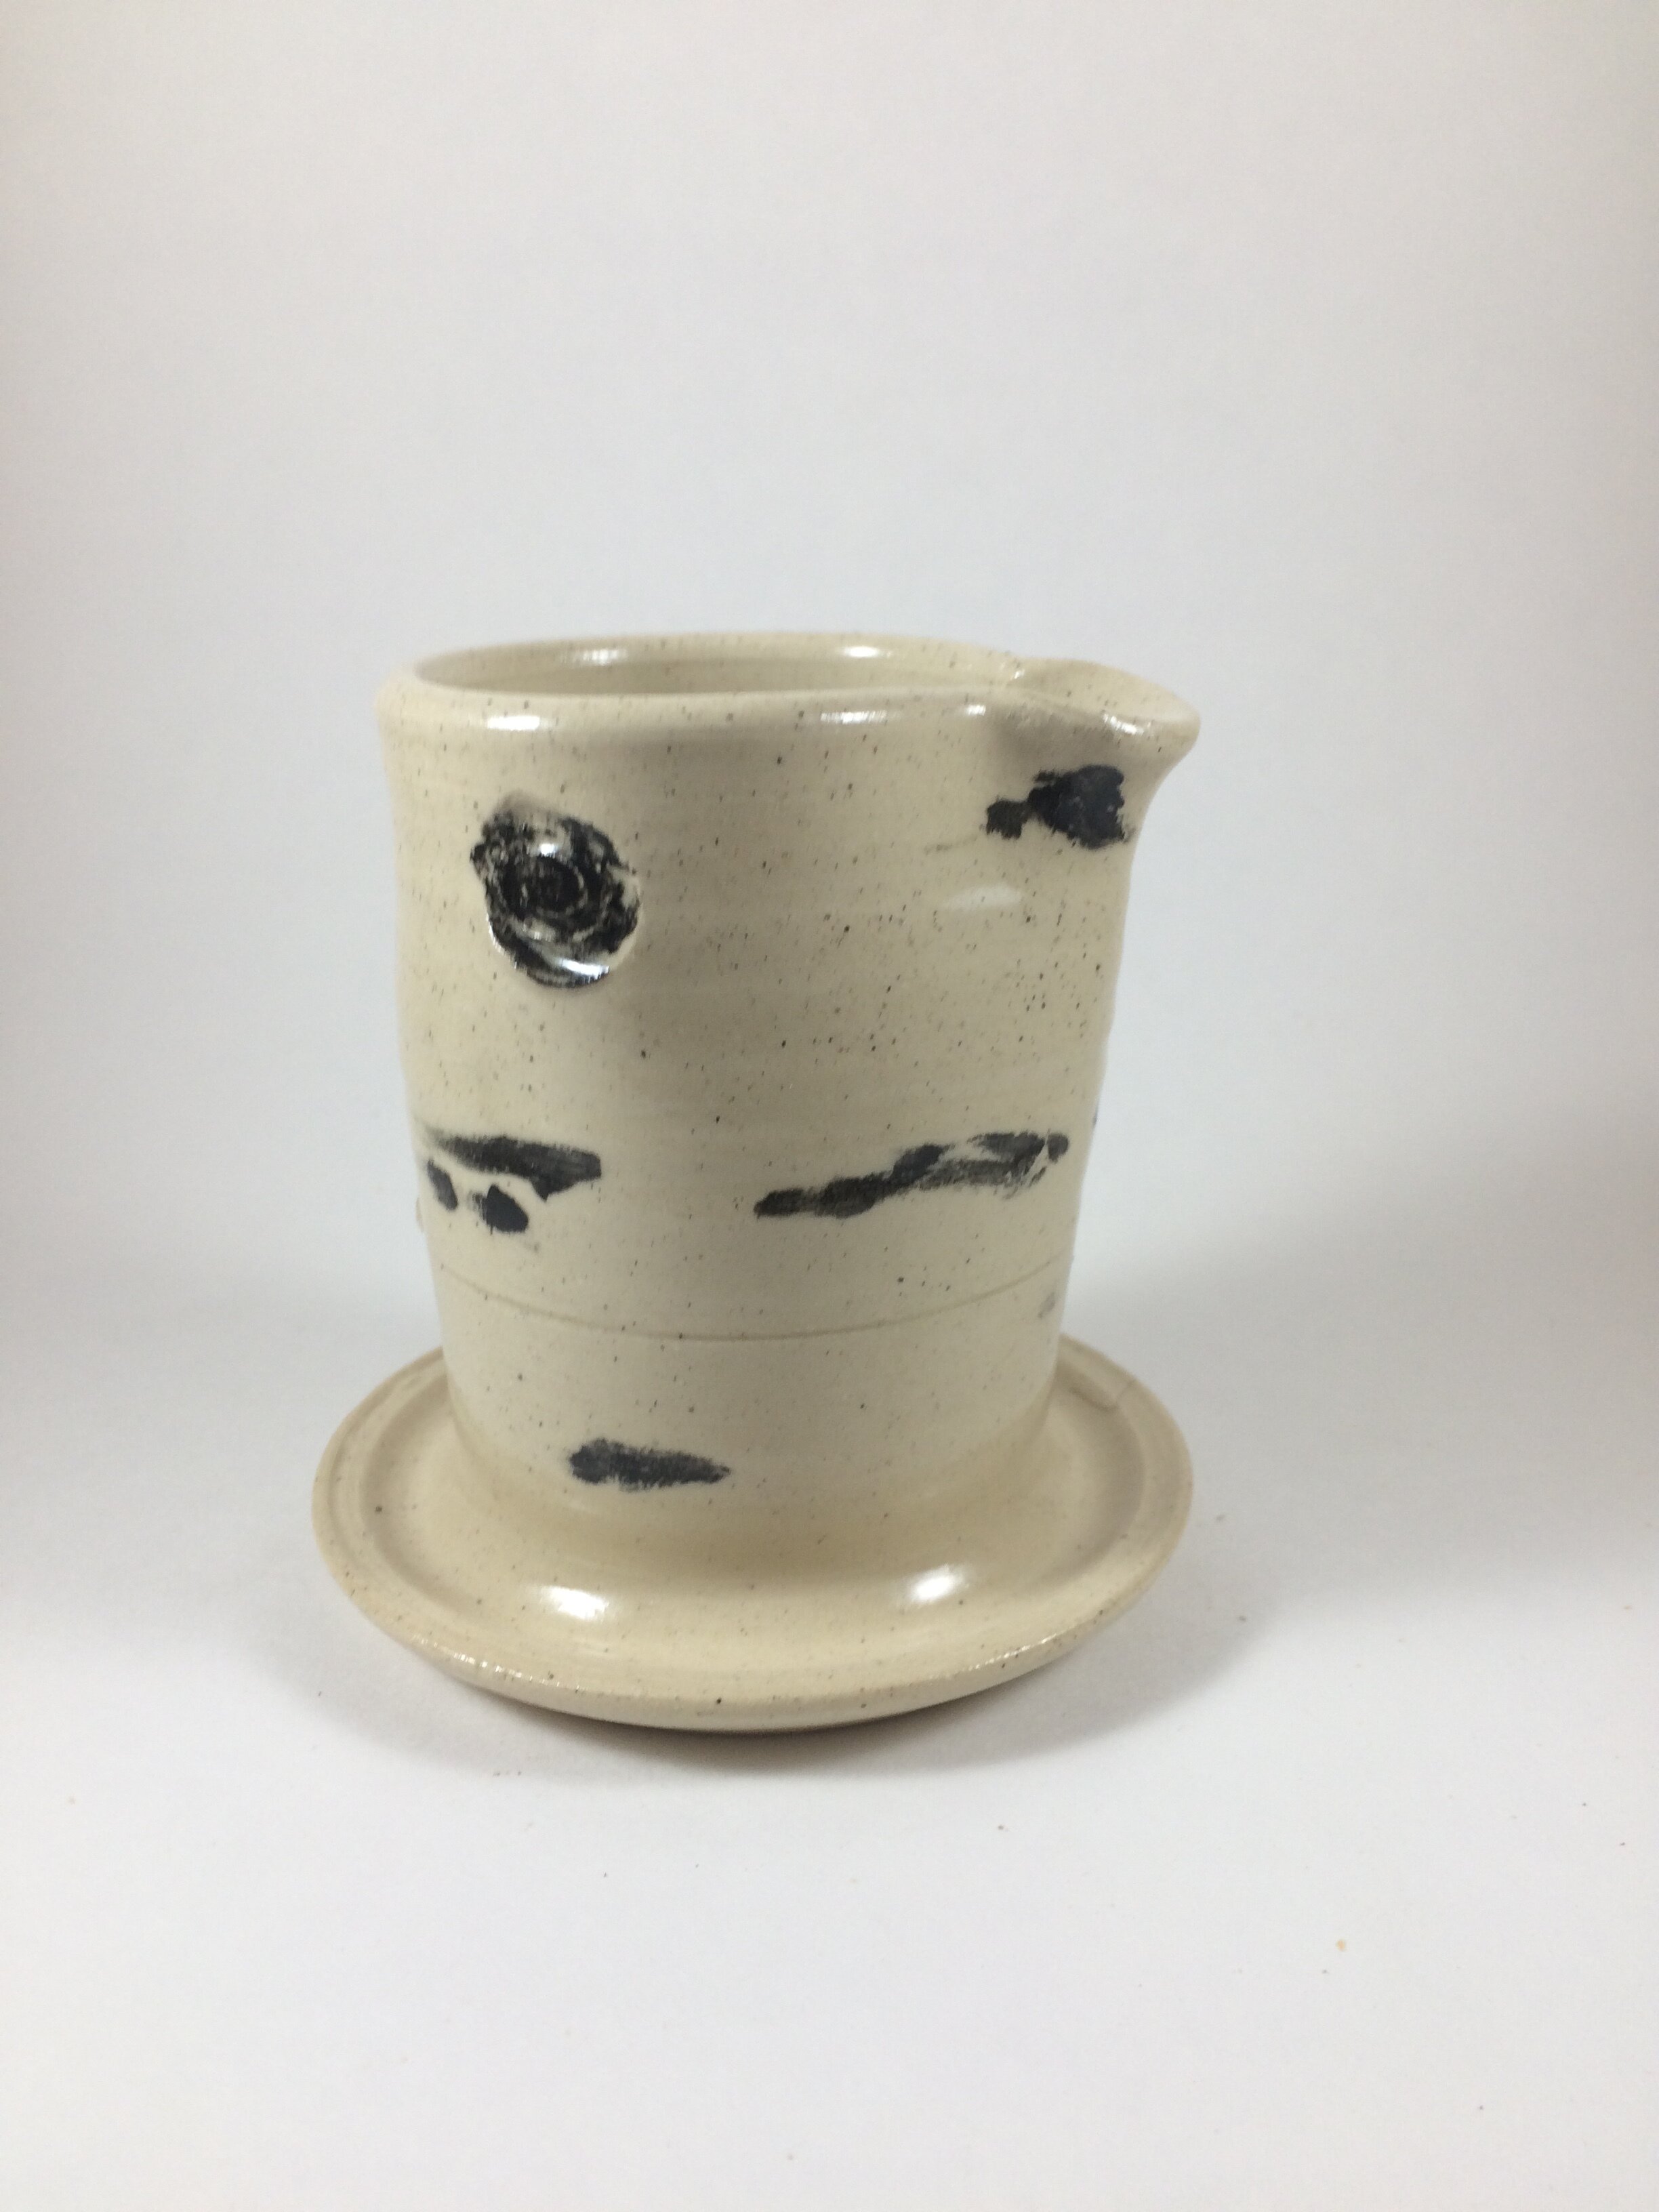 Nutfield Pottery Birch Line Handcrafted by Michael Gibbons of Nutfield Pottery White stoneware with black slip decoration, depicting New Hampshire’s state tree.